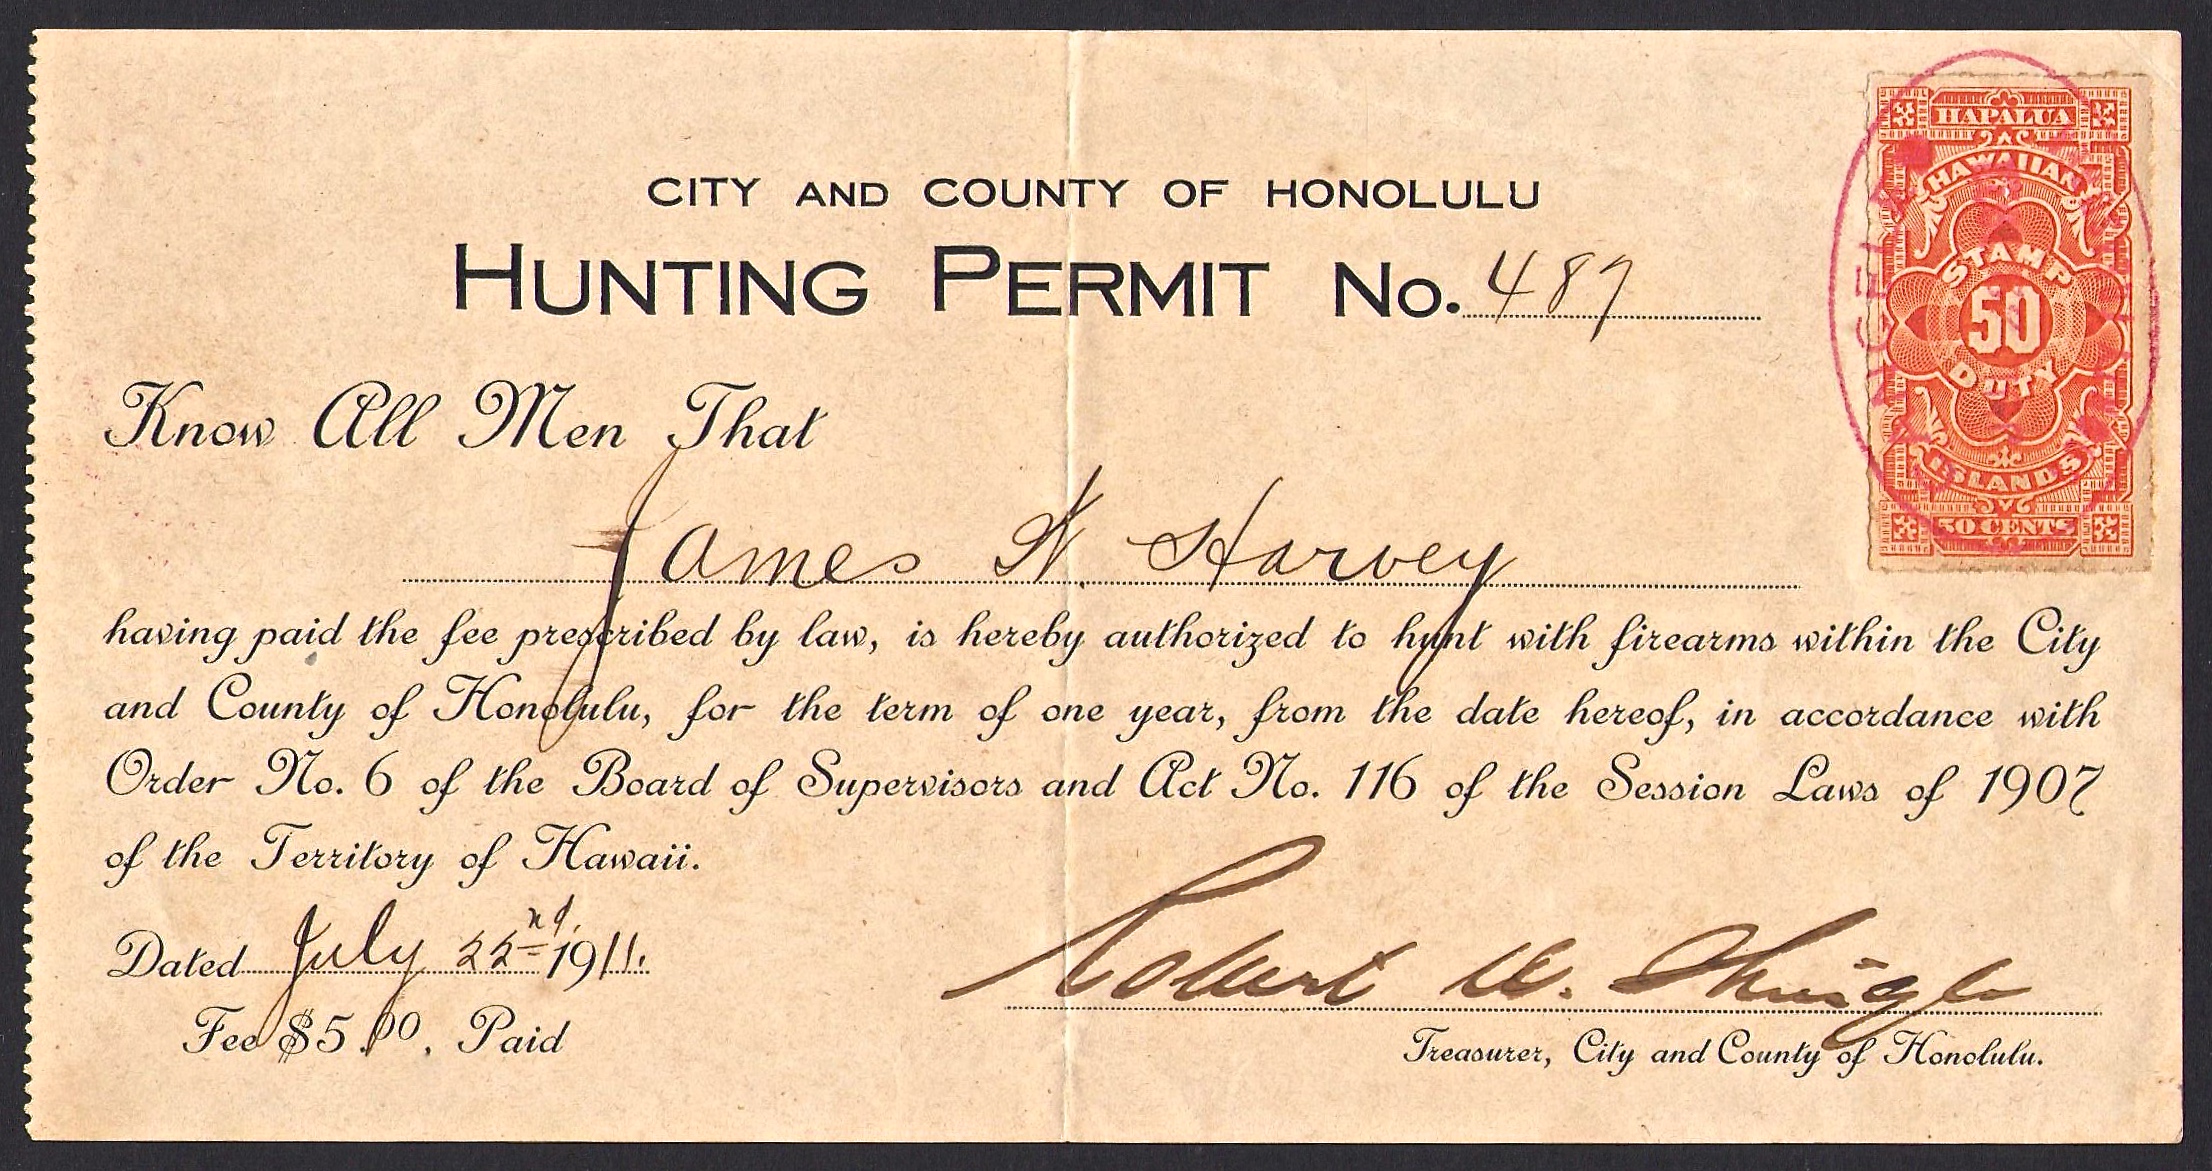 1911 City and County of Honolulu Hunting Permit